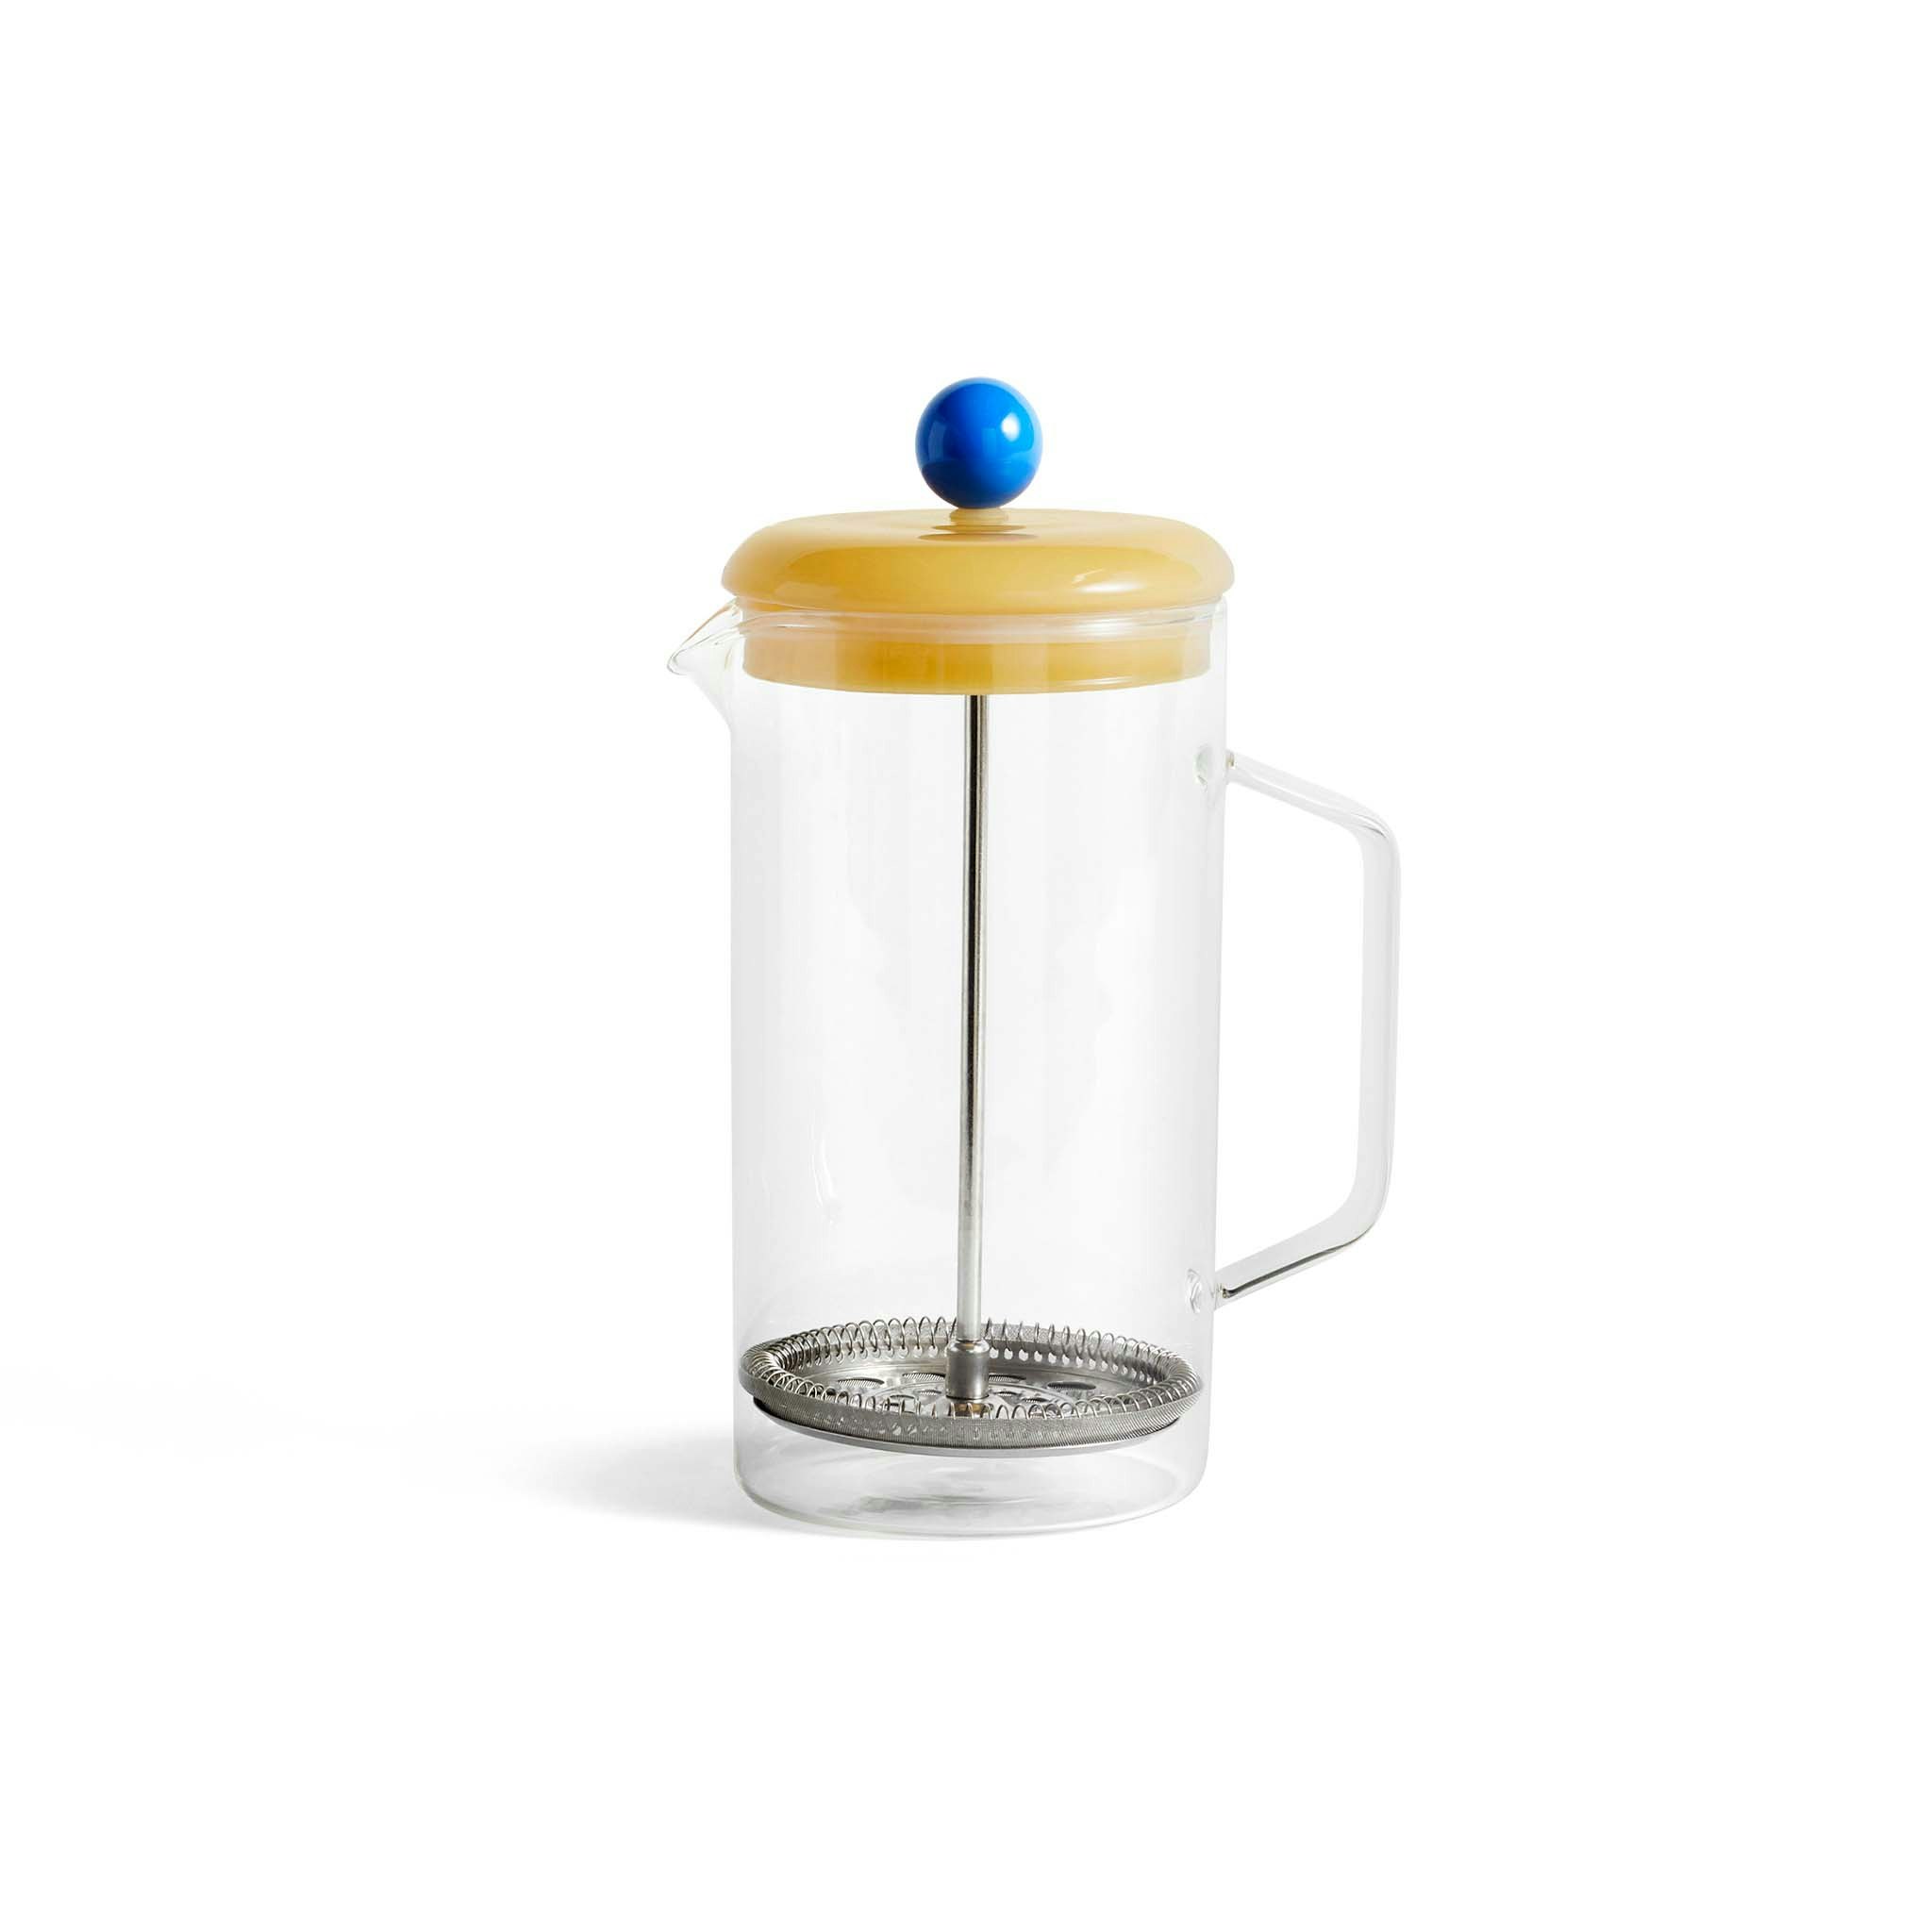 French Press Coffee Brewer by Hay